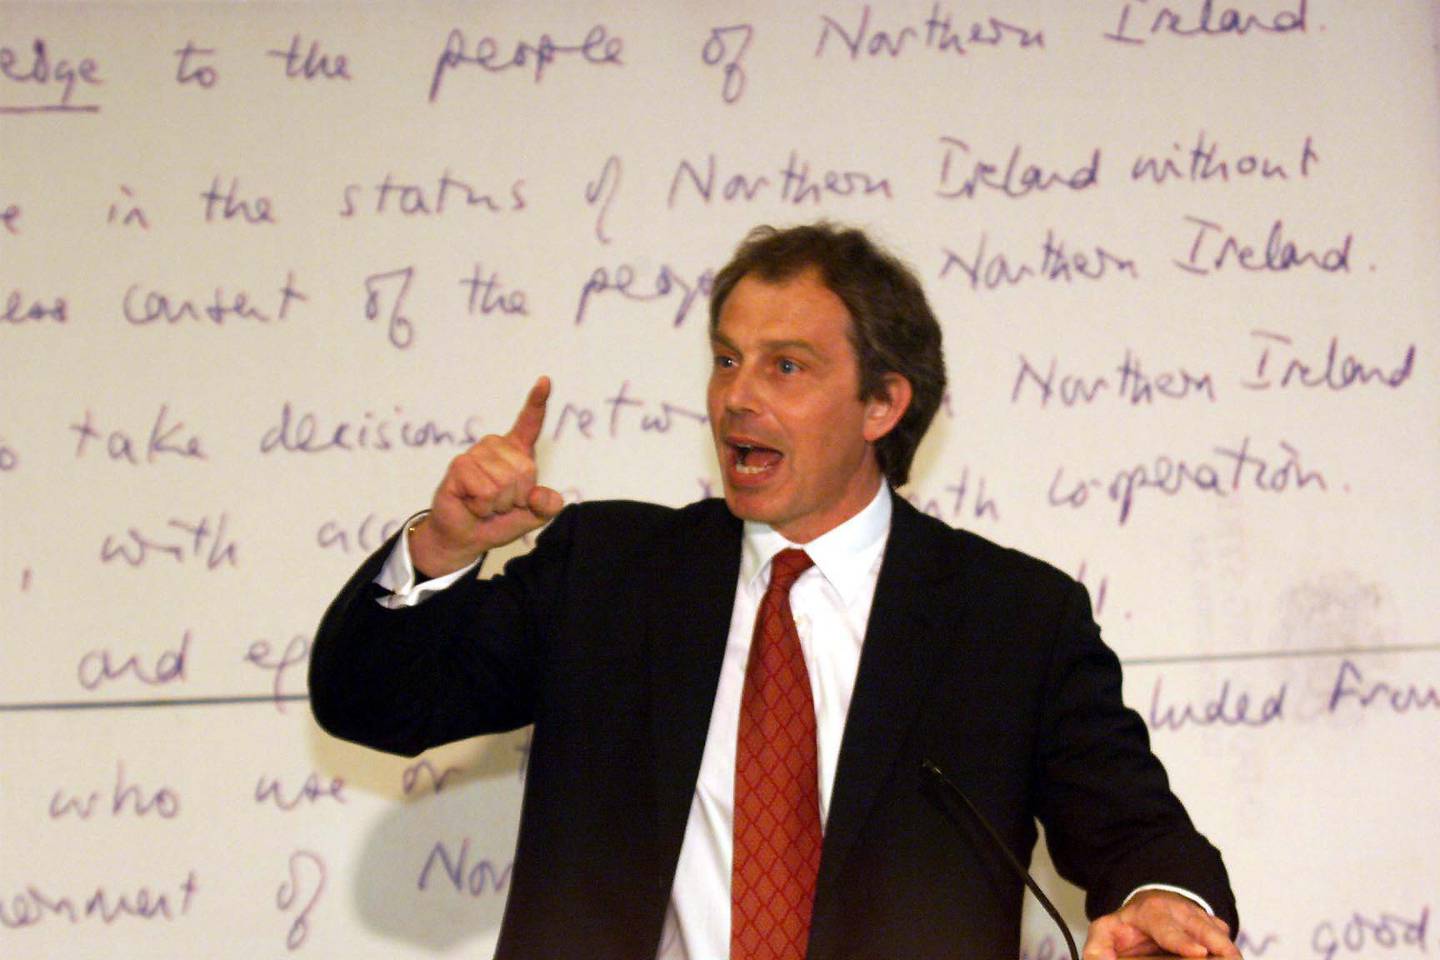 Tony Blair speaks at the University of Ulster, Coleraine, arguing his case for the Yes vote in the peace referendum in 1998. PA